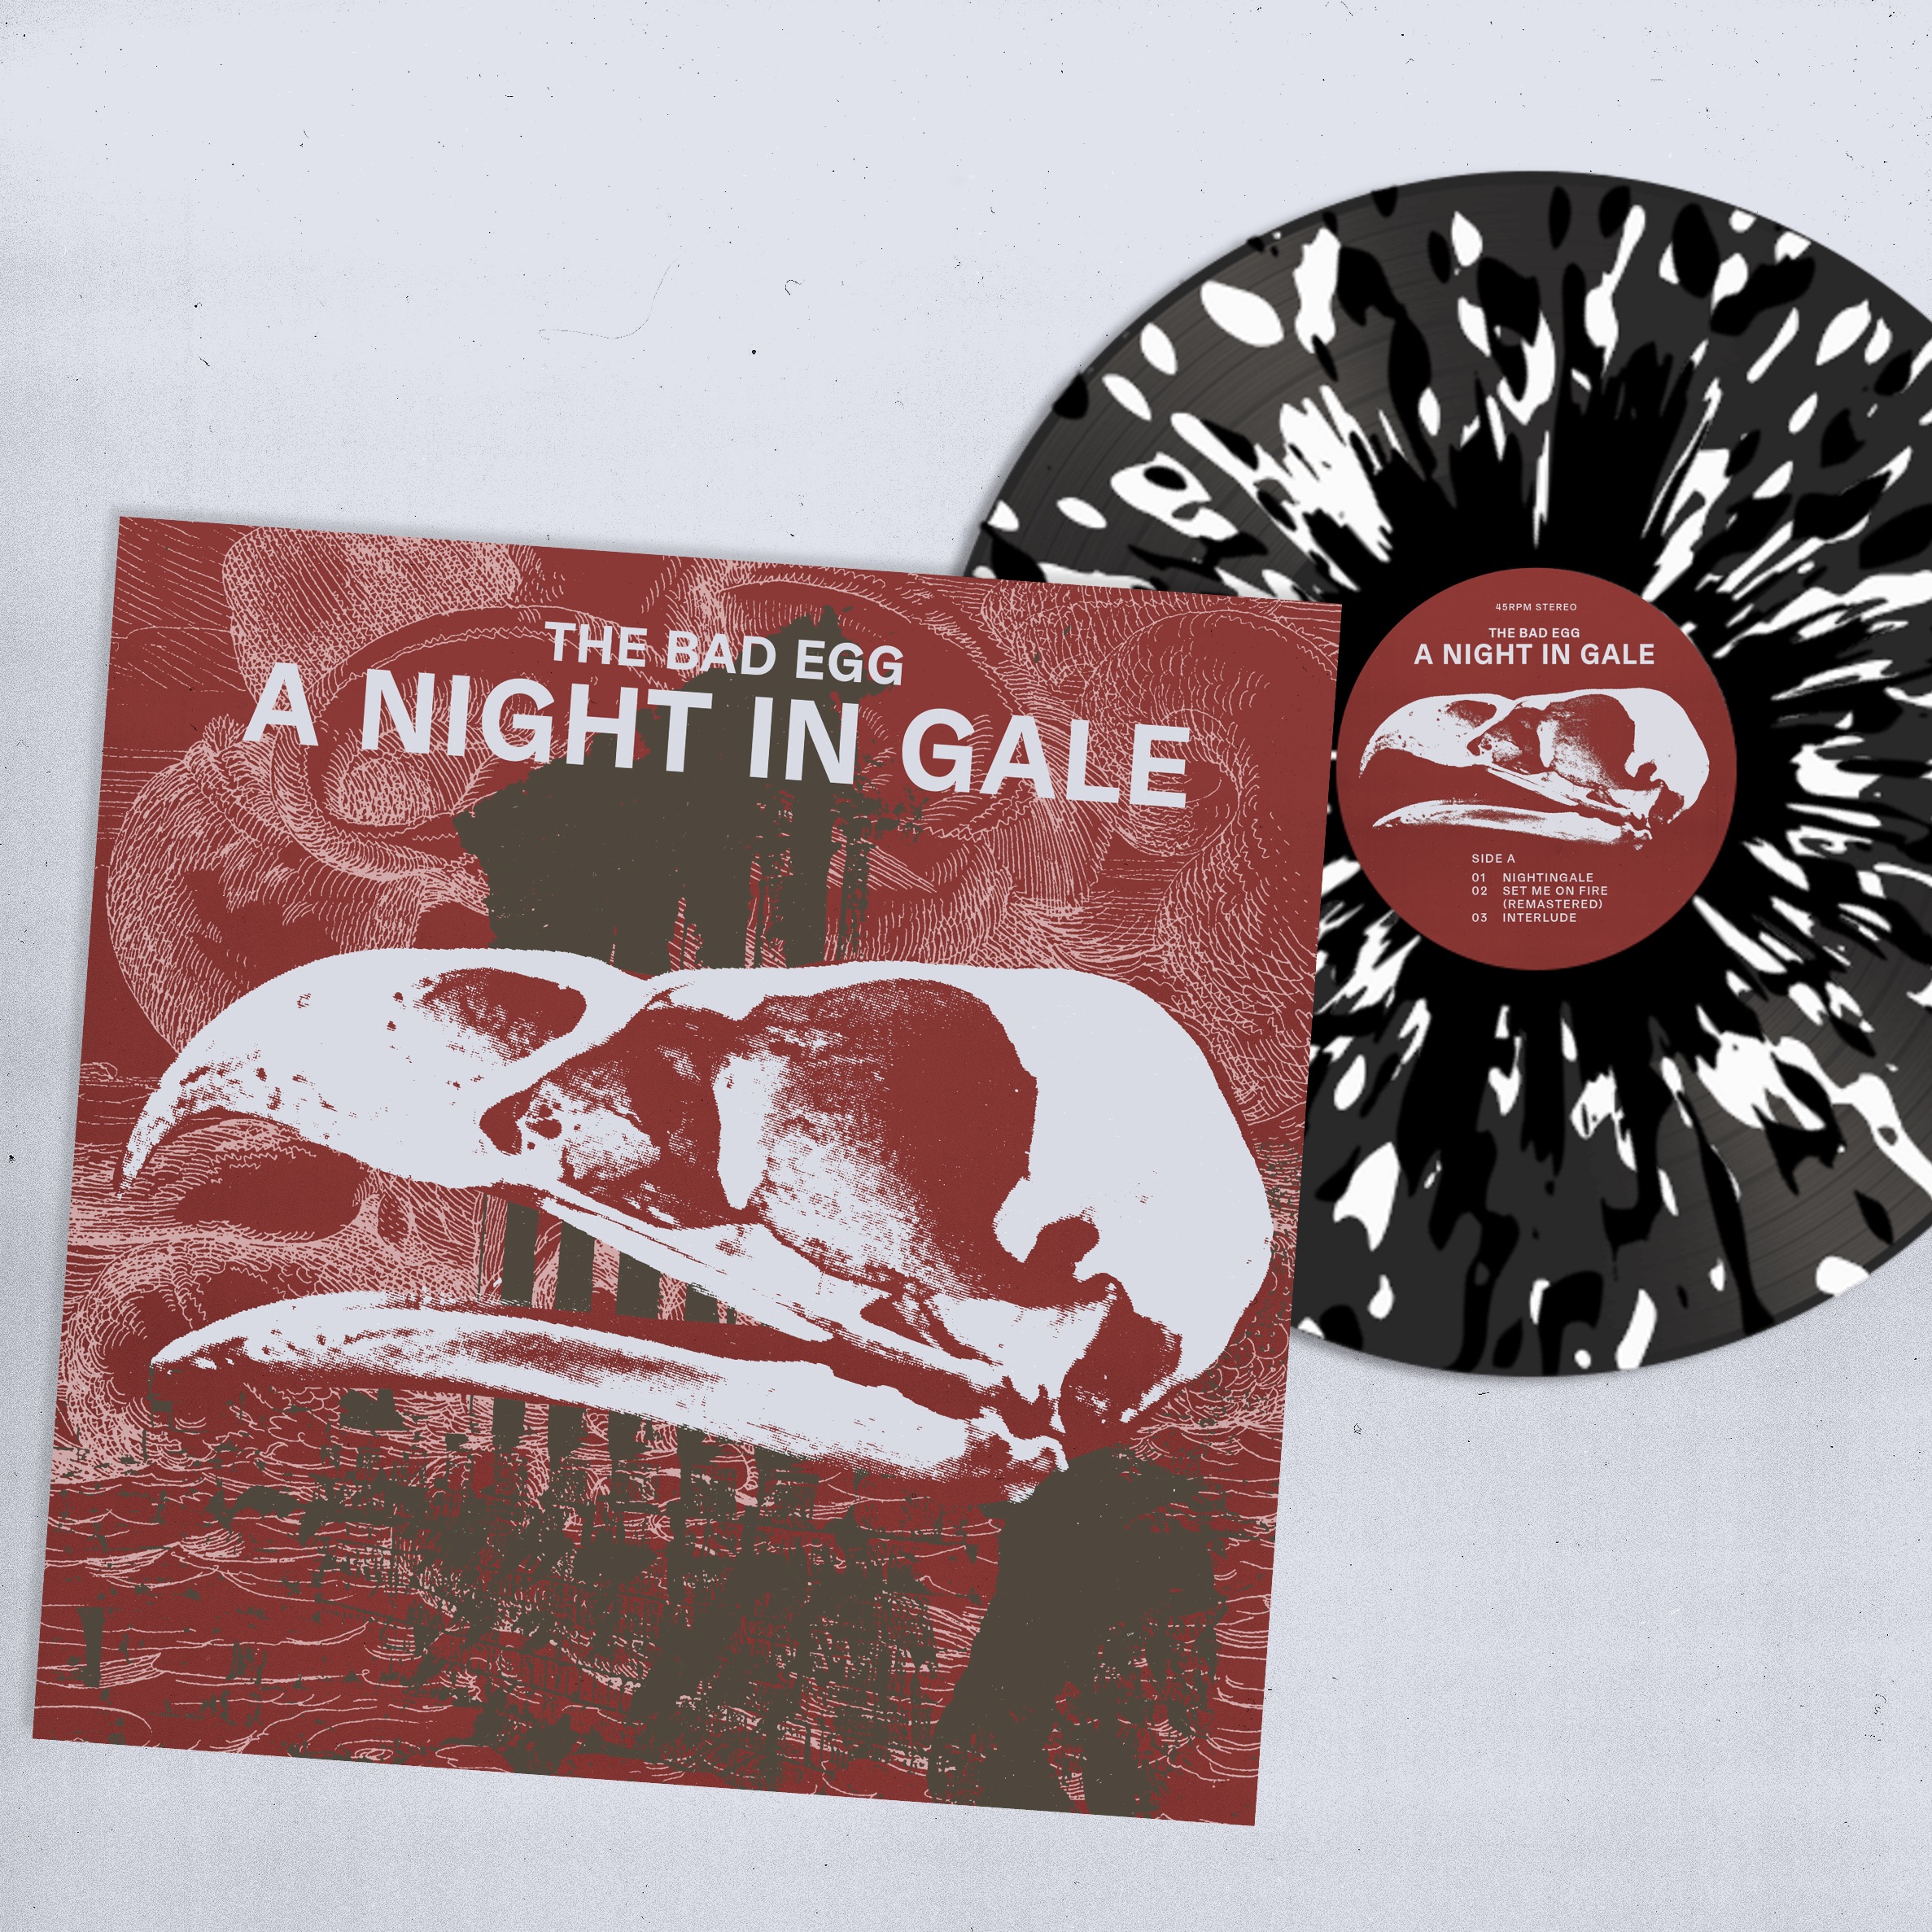 NEW EP: A NIGHT IN GALE